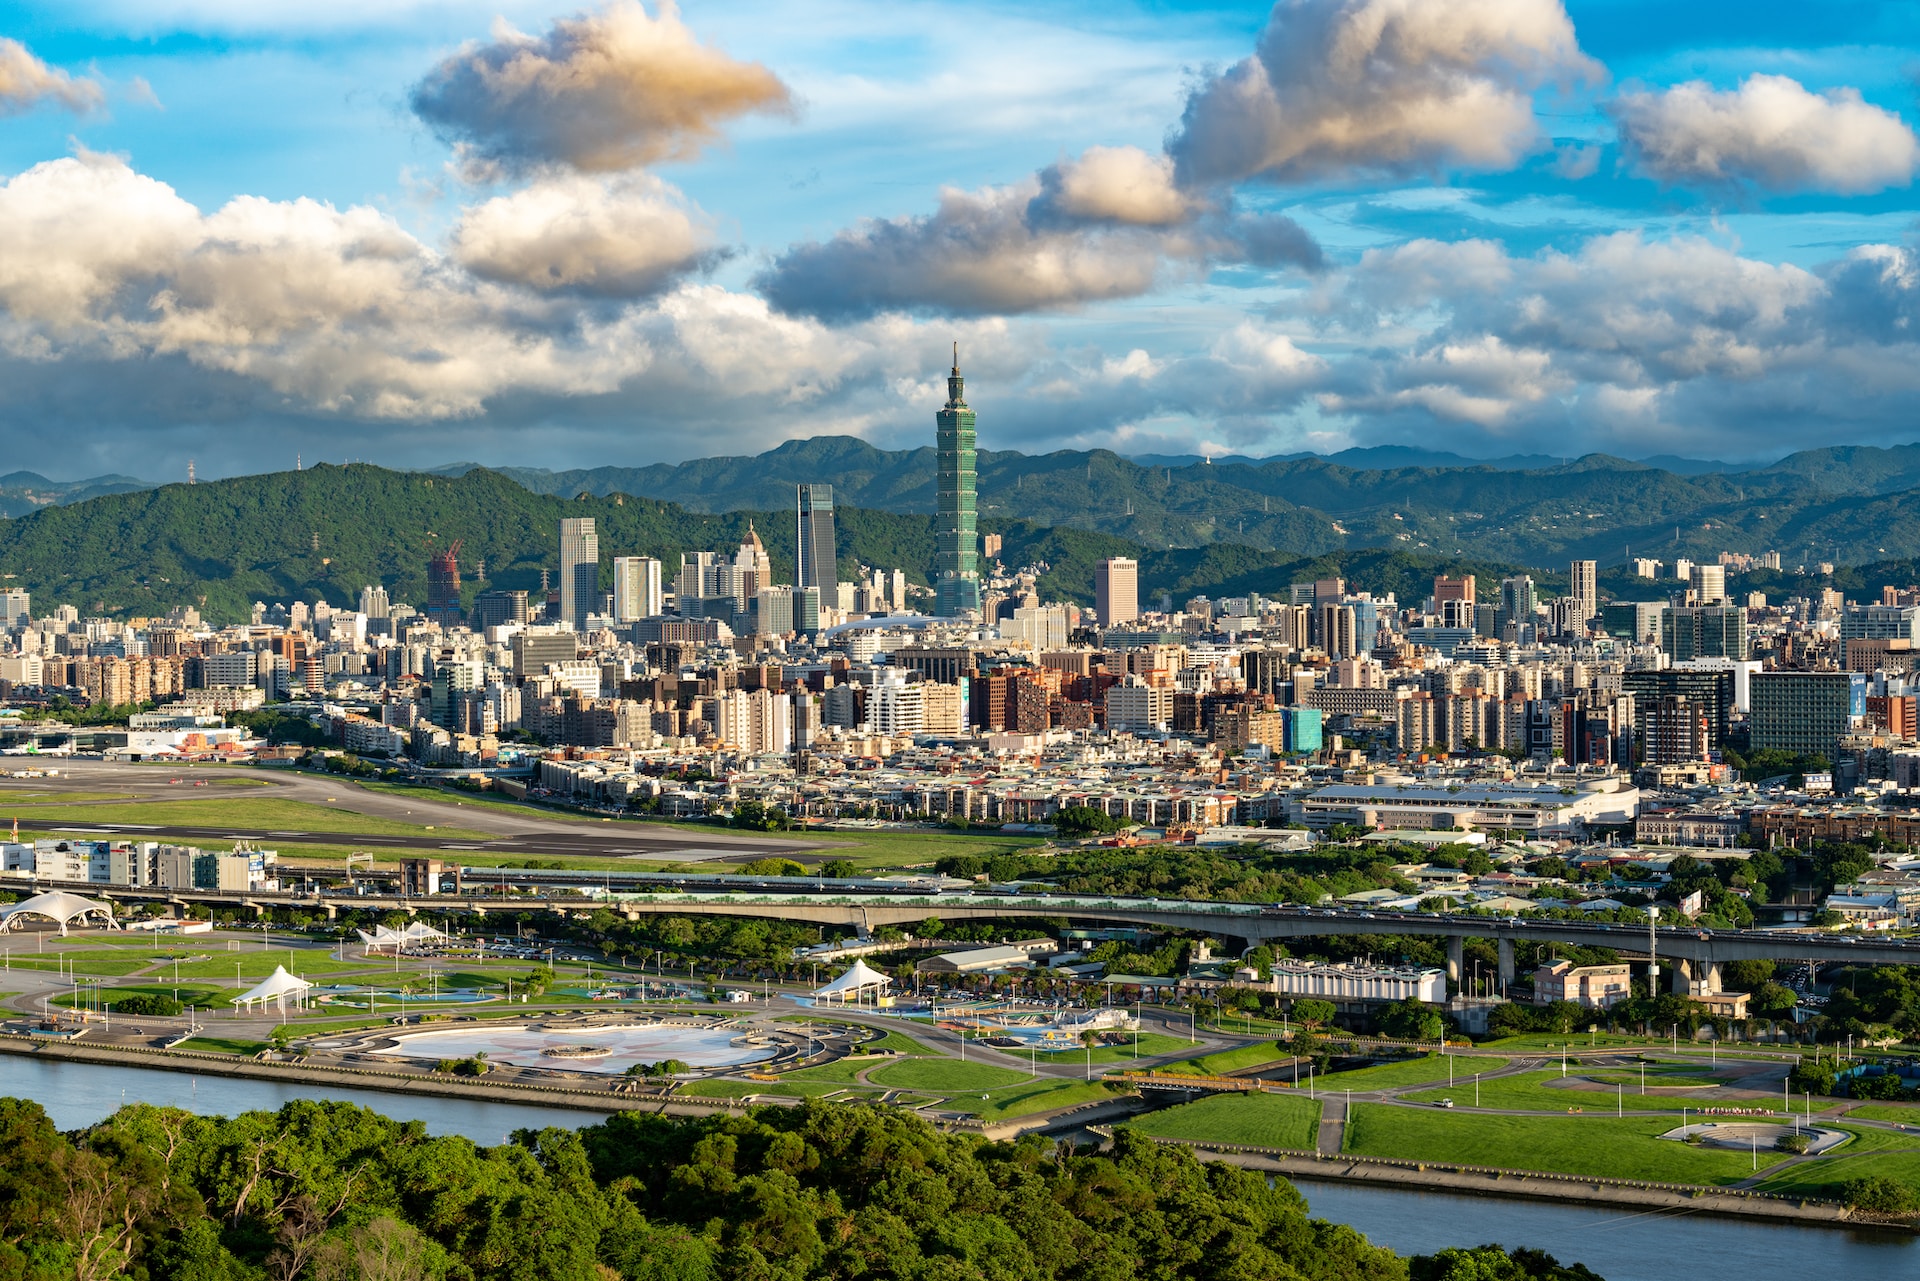 EVA Air Business Class: The Perfect Way to Fly to Taipei